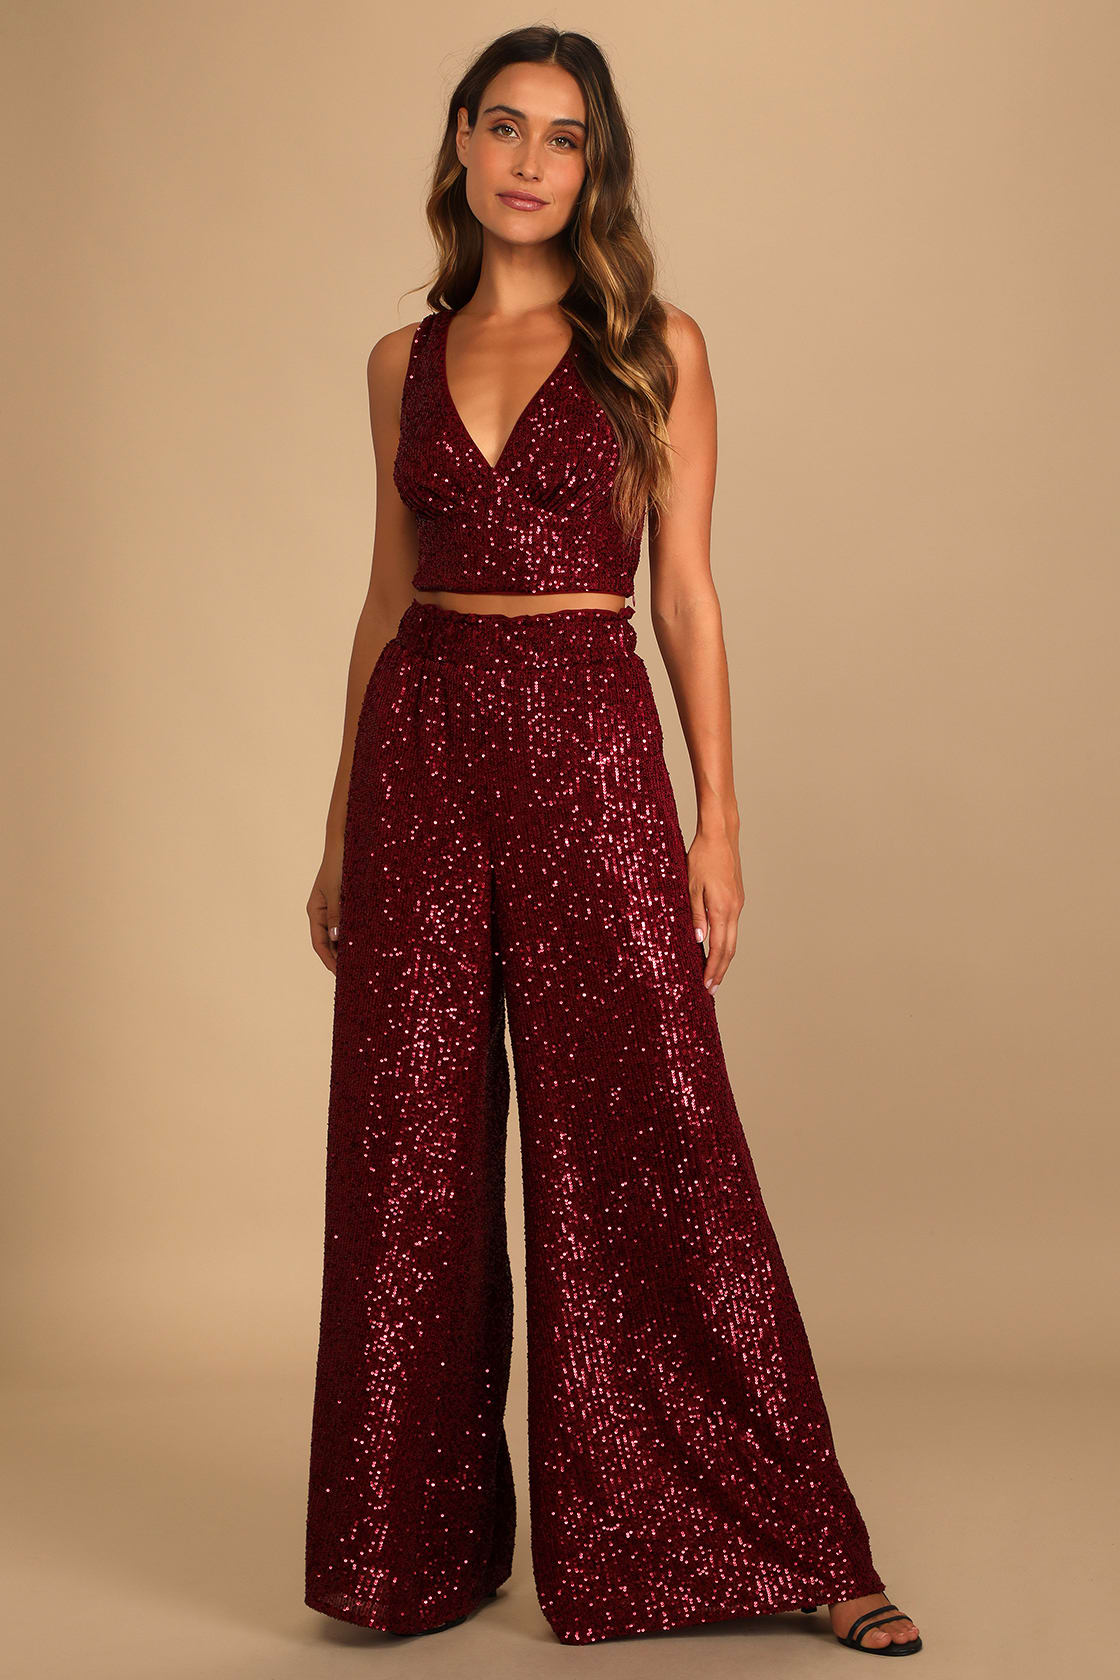 What To Wear With A red Sequin Top: matching pants